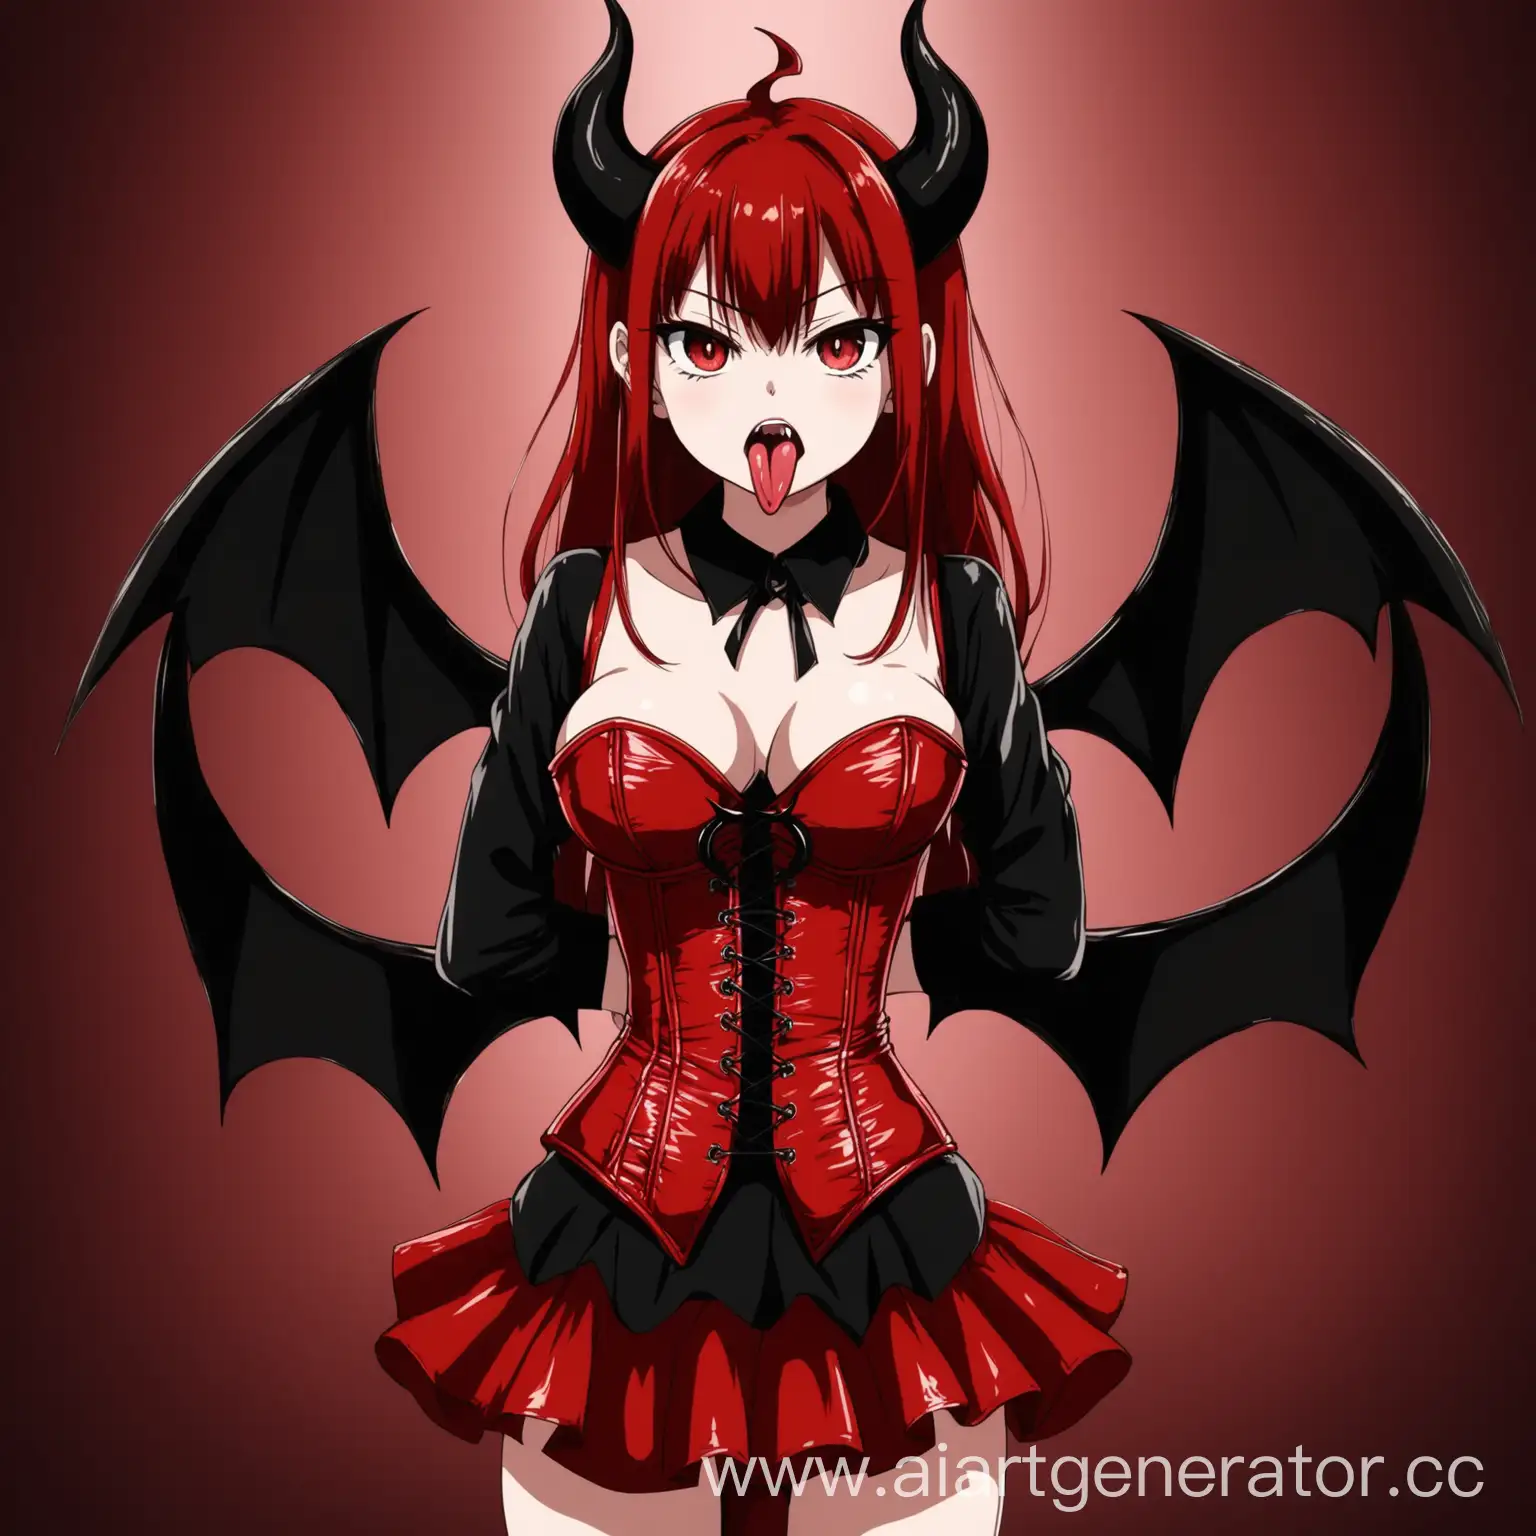 Sassy-Anime-Devil-Girl-in-Red-Leather-Corset-Sticking-Out-Tongue